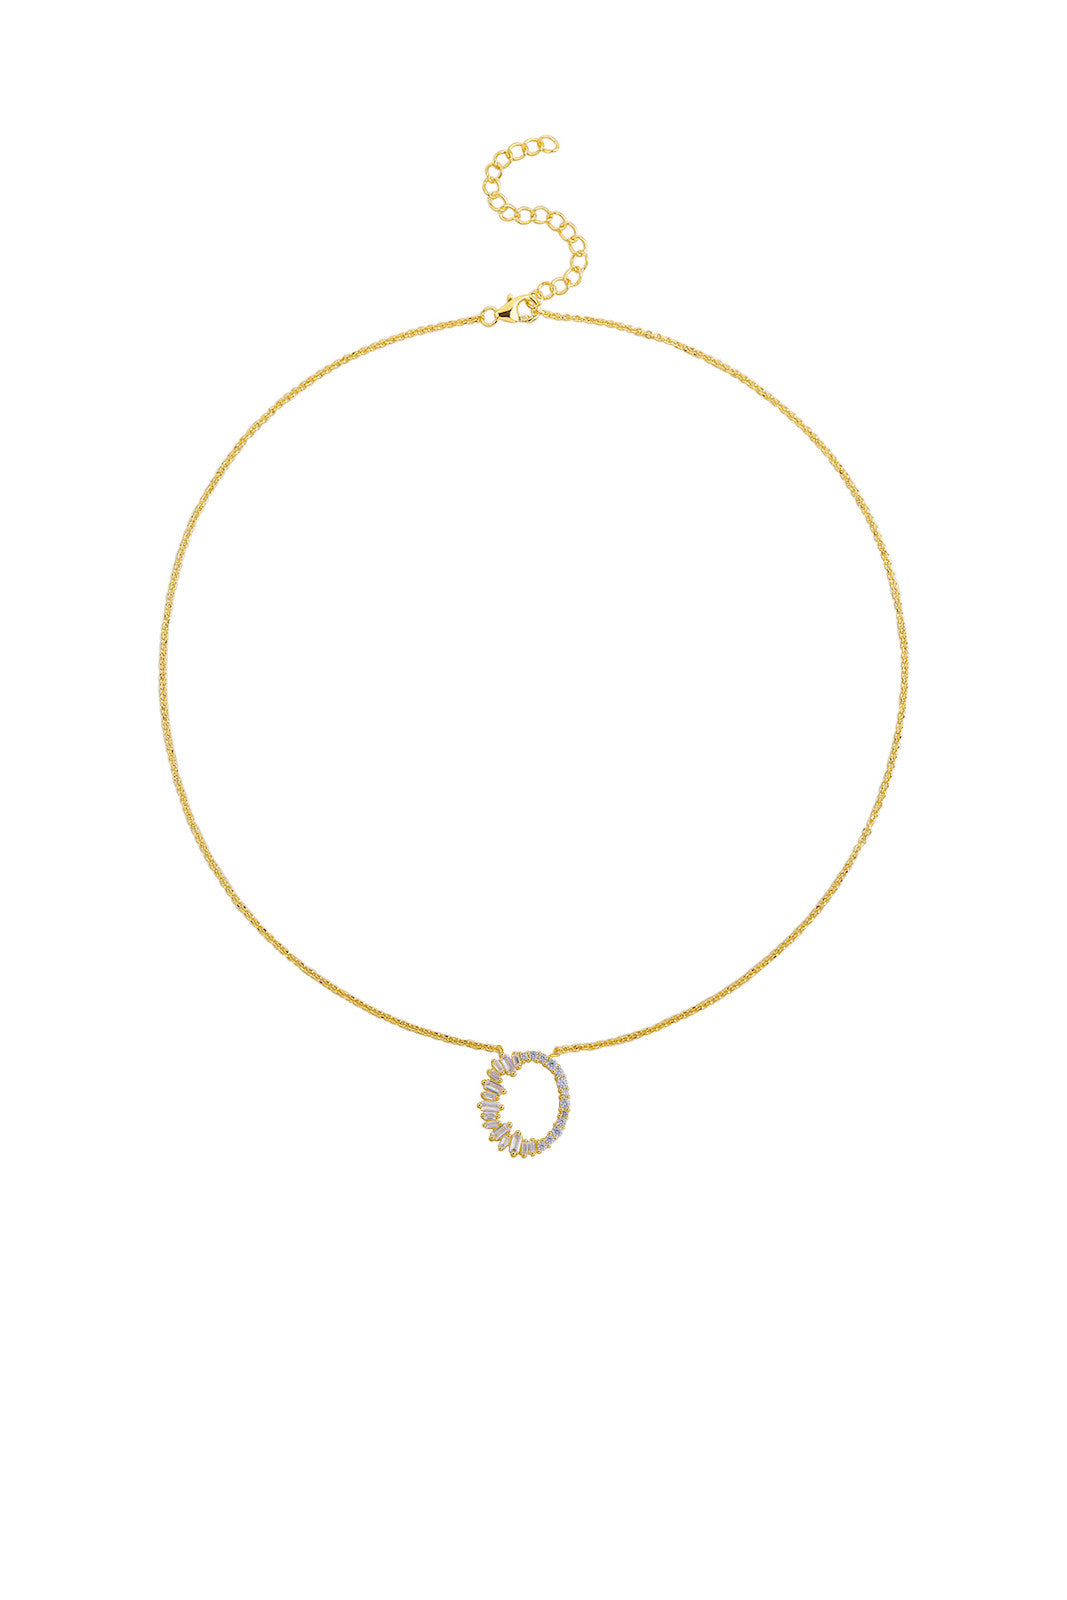 Gold Plated Sterling Silver Initial Necklace - Letter O Detail